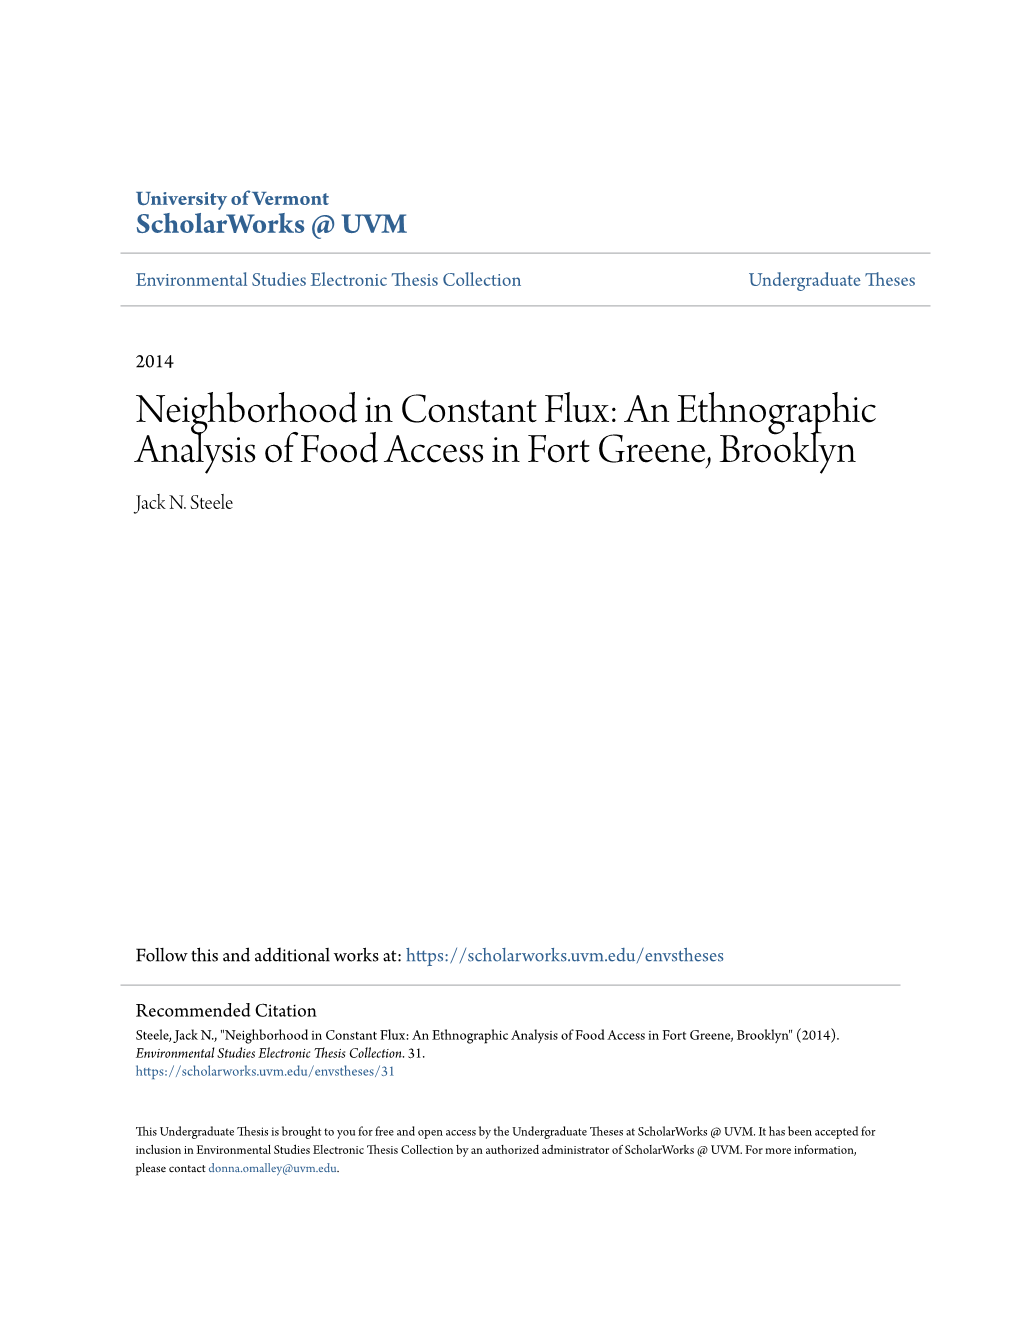 An Ethnographic Analysis of Food Access in Fort Greene, Brooklyn Jack N